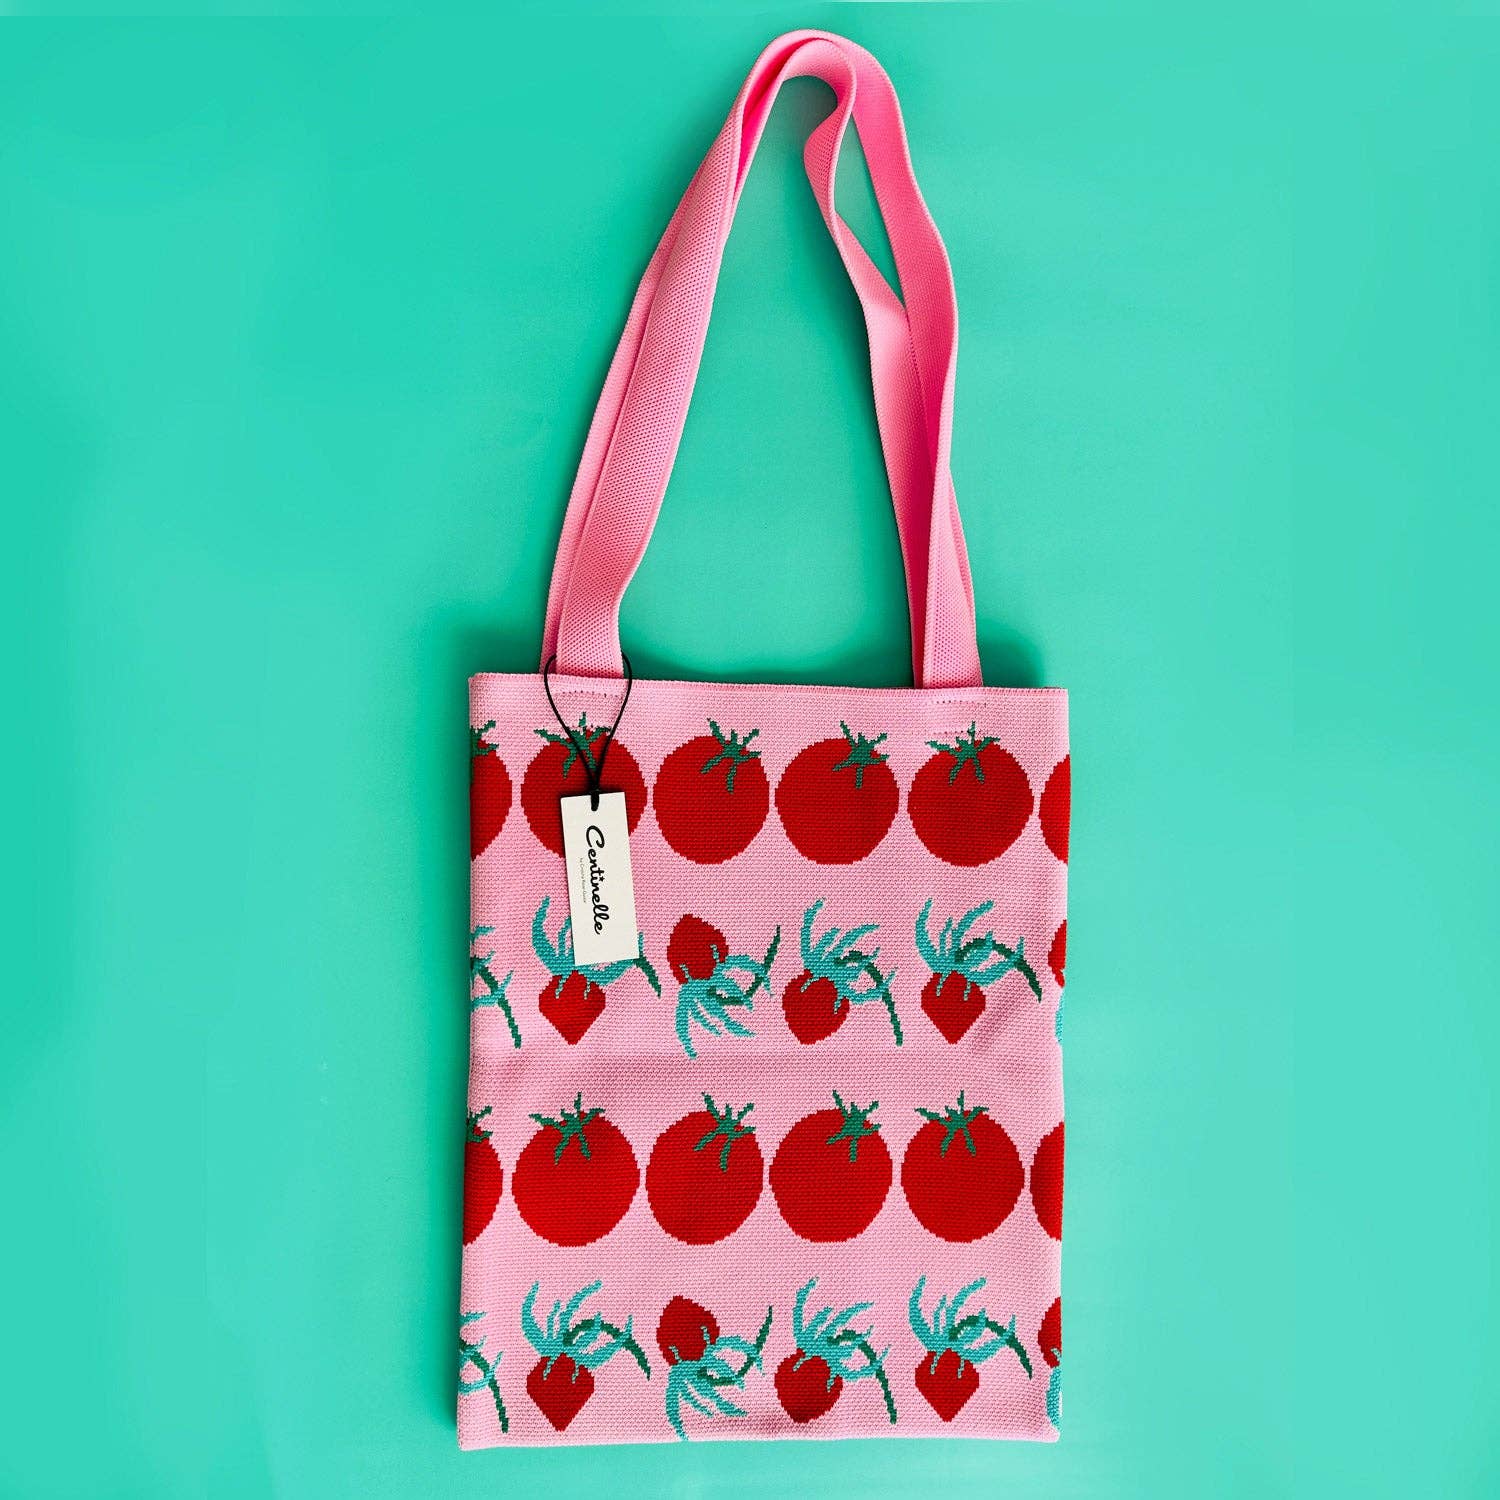 Knit tote bag with red tomatoes on it 